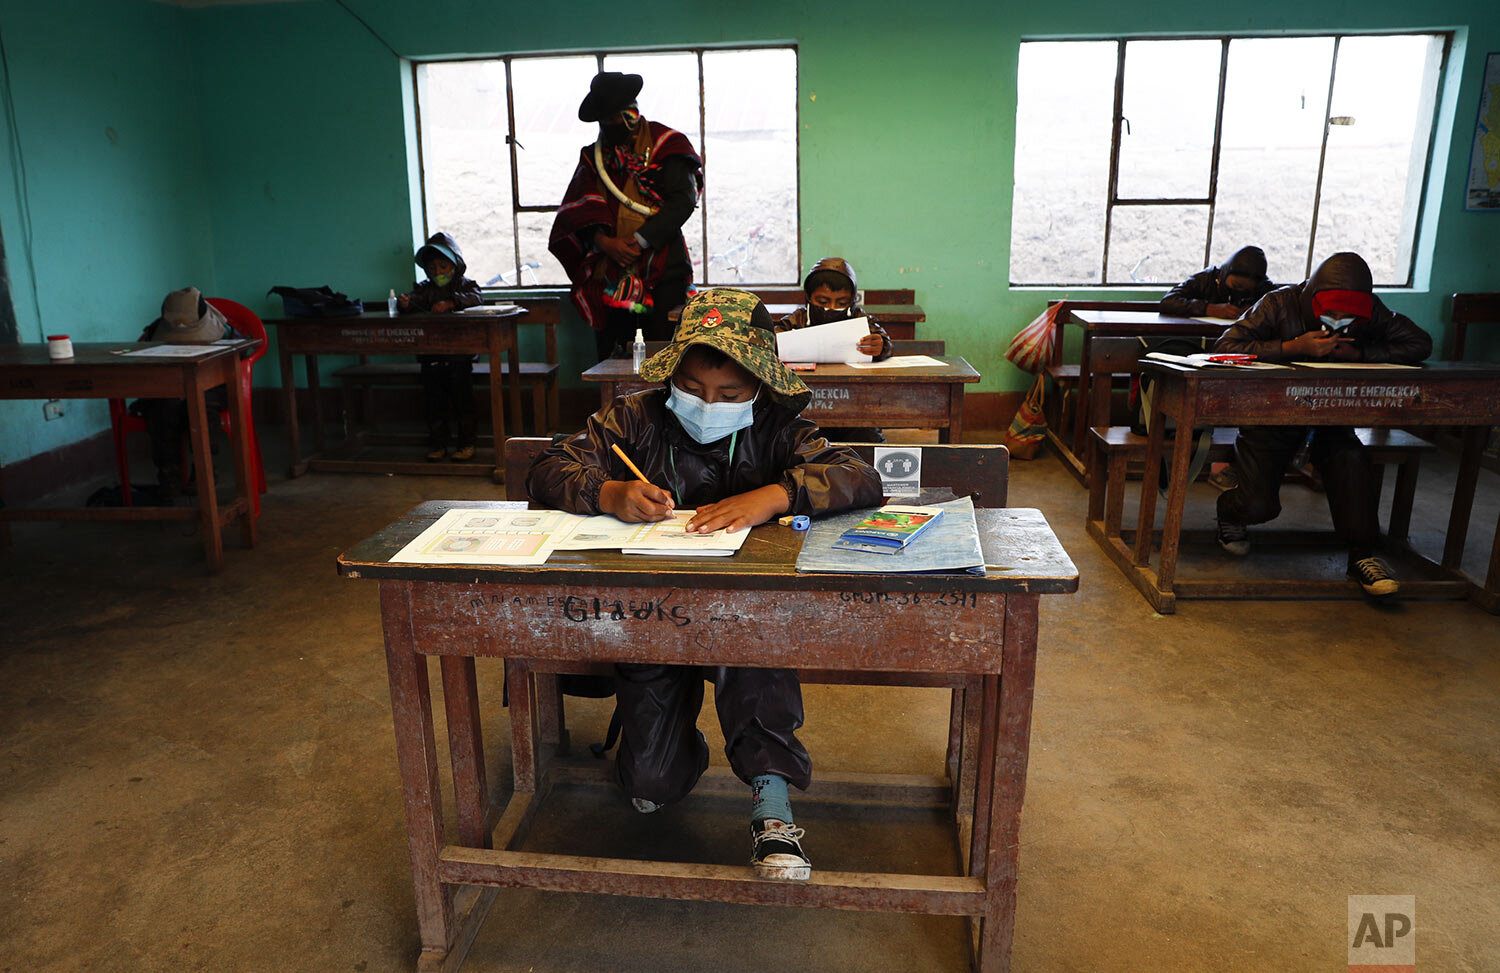  An Aymara Indigenous parent watches over students during the first week back to in-person class with pupils wearing new protective uniforms amid the COVID-19 pandemic near Jesus de Machaca, Bolivia, Feb. 4, 2021. (AP Photo/Juan Karita) 